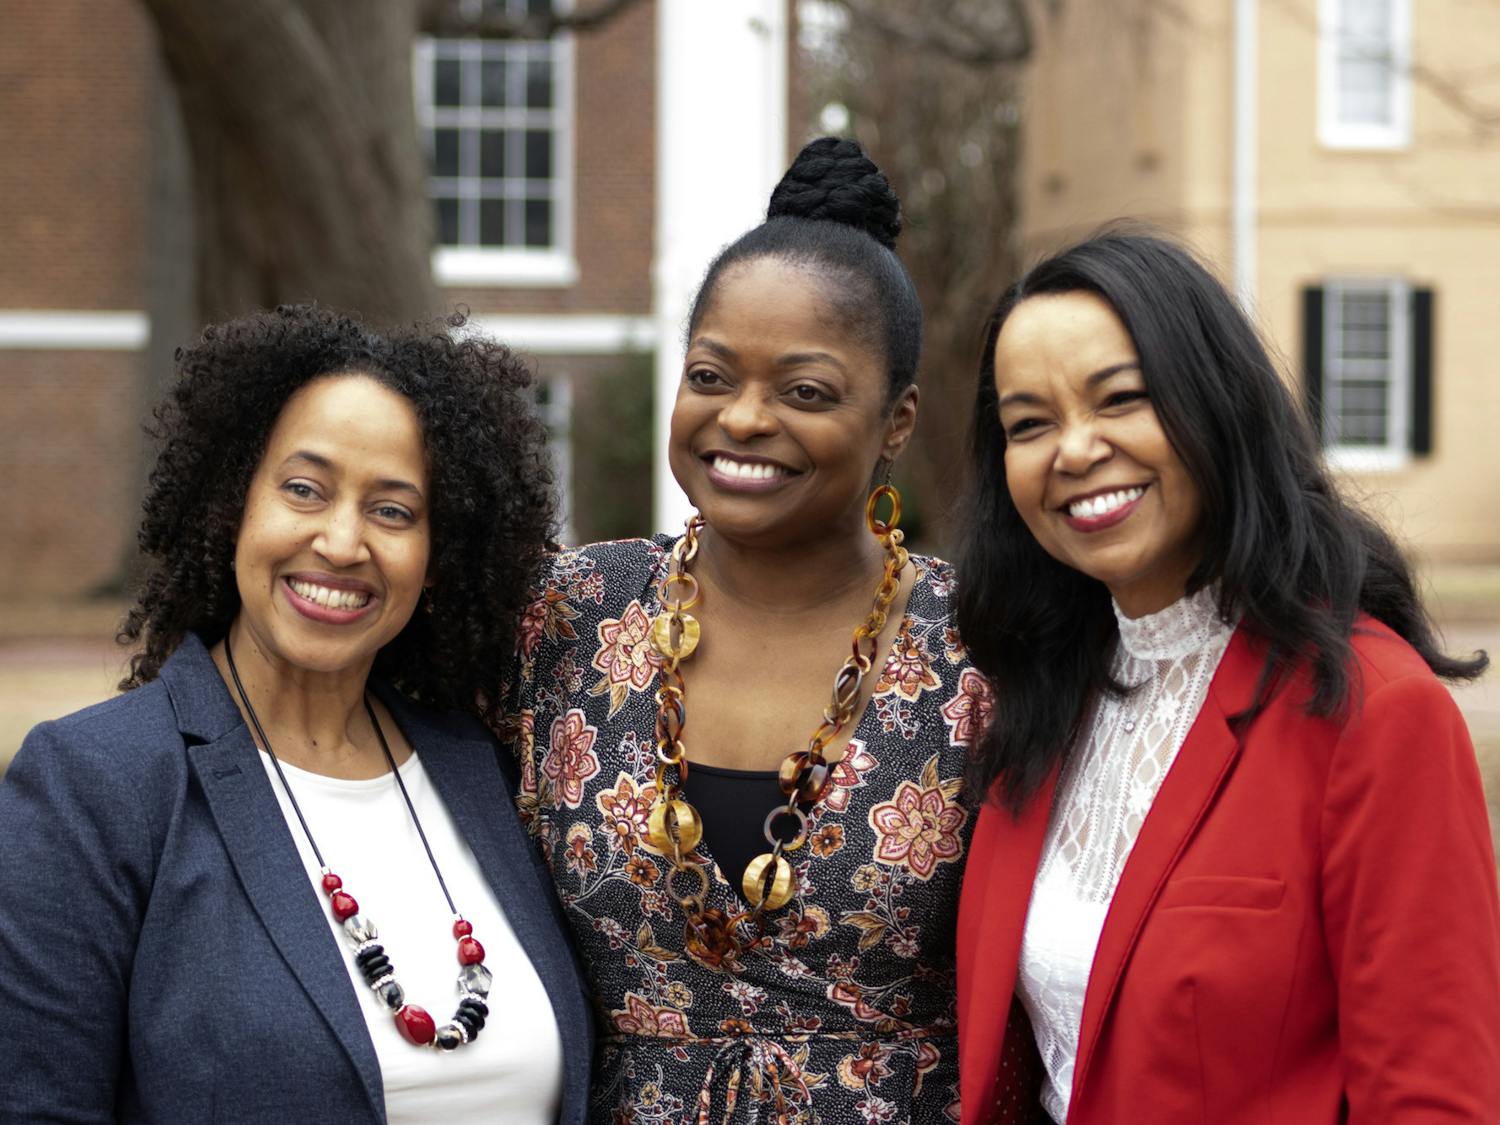 Three USC alumnae and interviews in the student documentary, "The Backbone," pose for a photo at the Horseshoe on Feb. 10, 2023. The Office of Diversity, Equity and Inclusion revealed 18 new bricks in honor of them women that created the film.&nbsp;